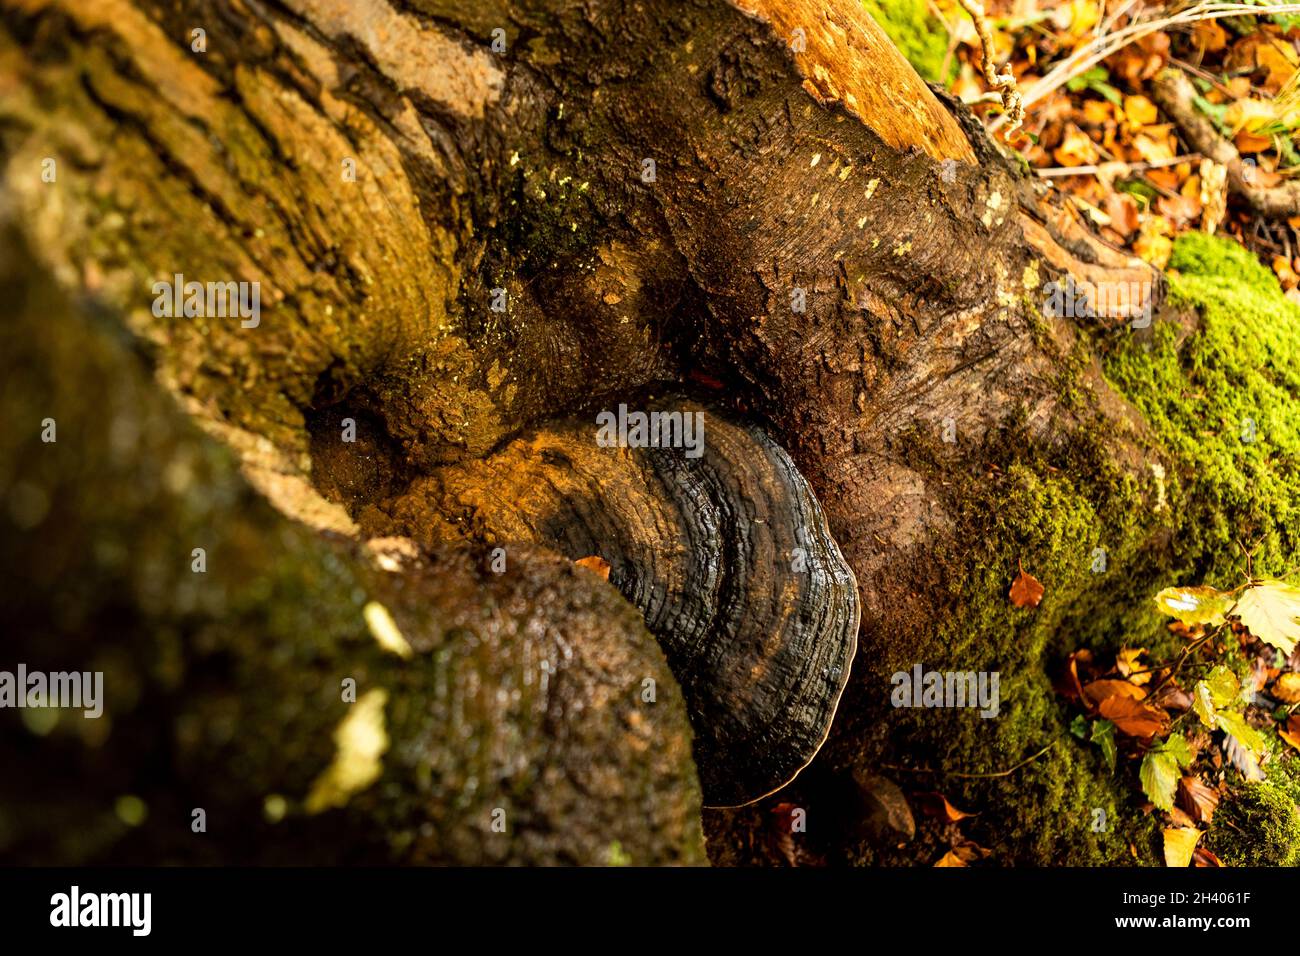 Fomitopsis pinicola, Red-belted Bracket. Autumn, Forest of Dean, England. Fungus Stock Photo